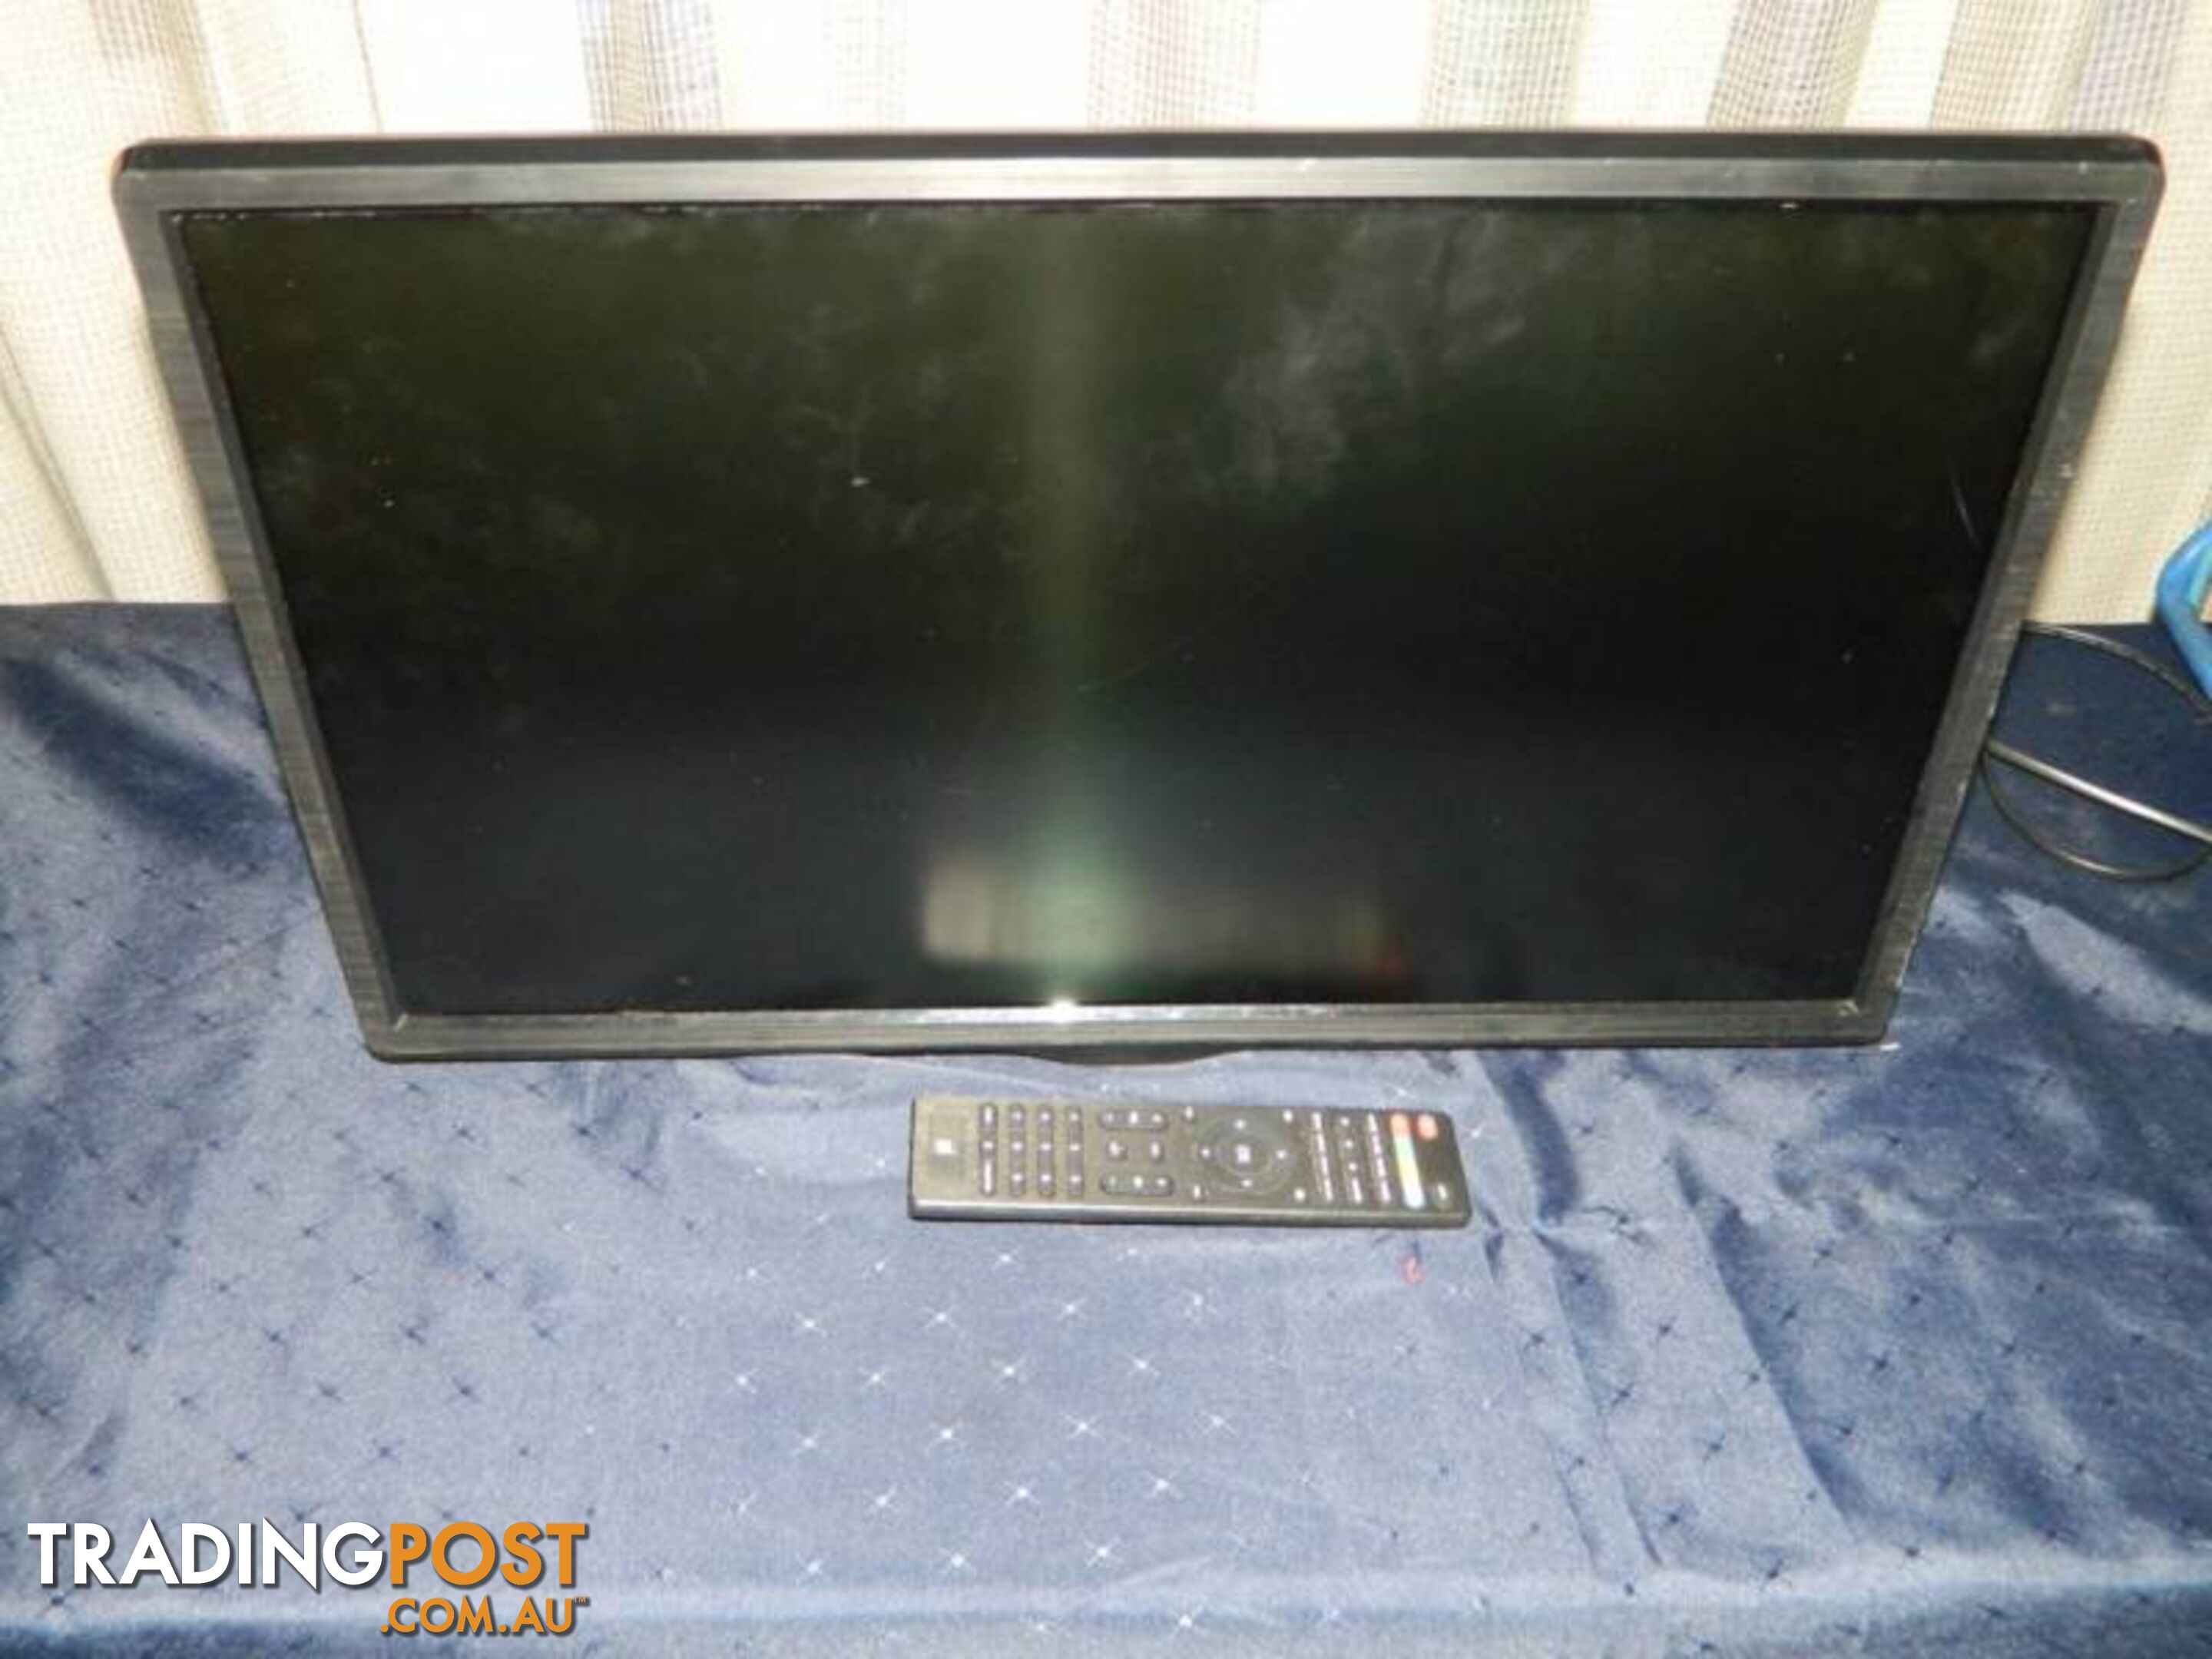 DSE Full HD LED Tv with Inbuilt DVD Player and Remote